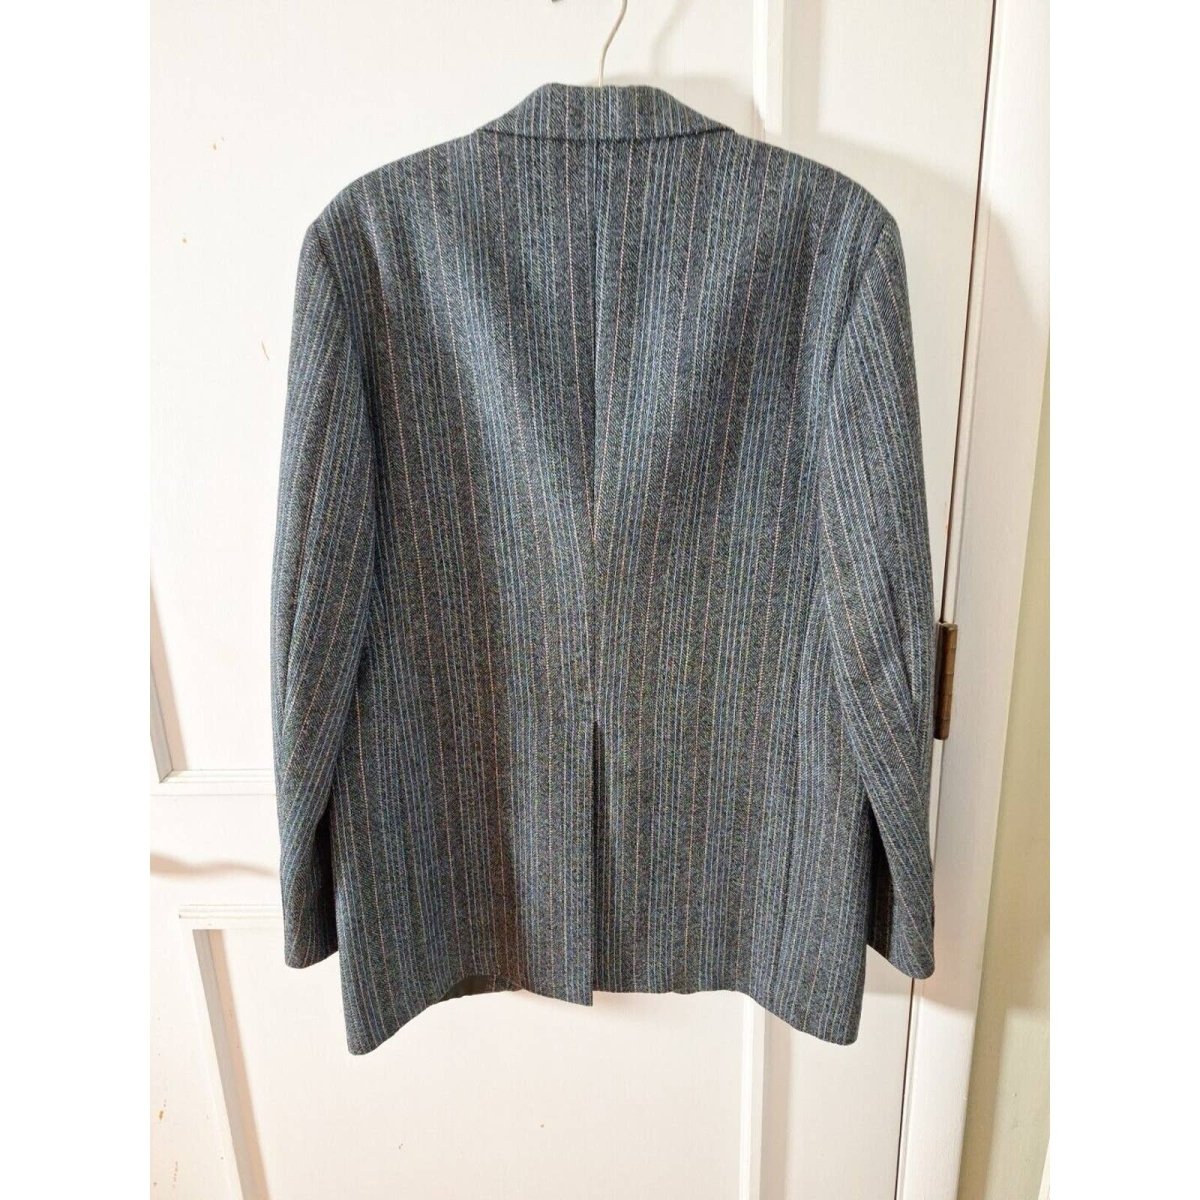 Vintage 60s/70s Striped Wool 3 Button Sport Coat Men Size 40R - themallvintage The Mall Vintage